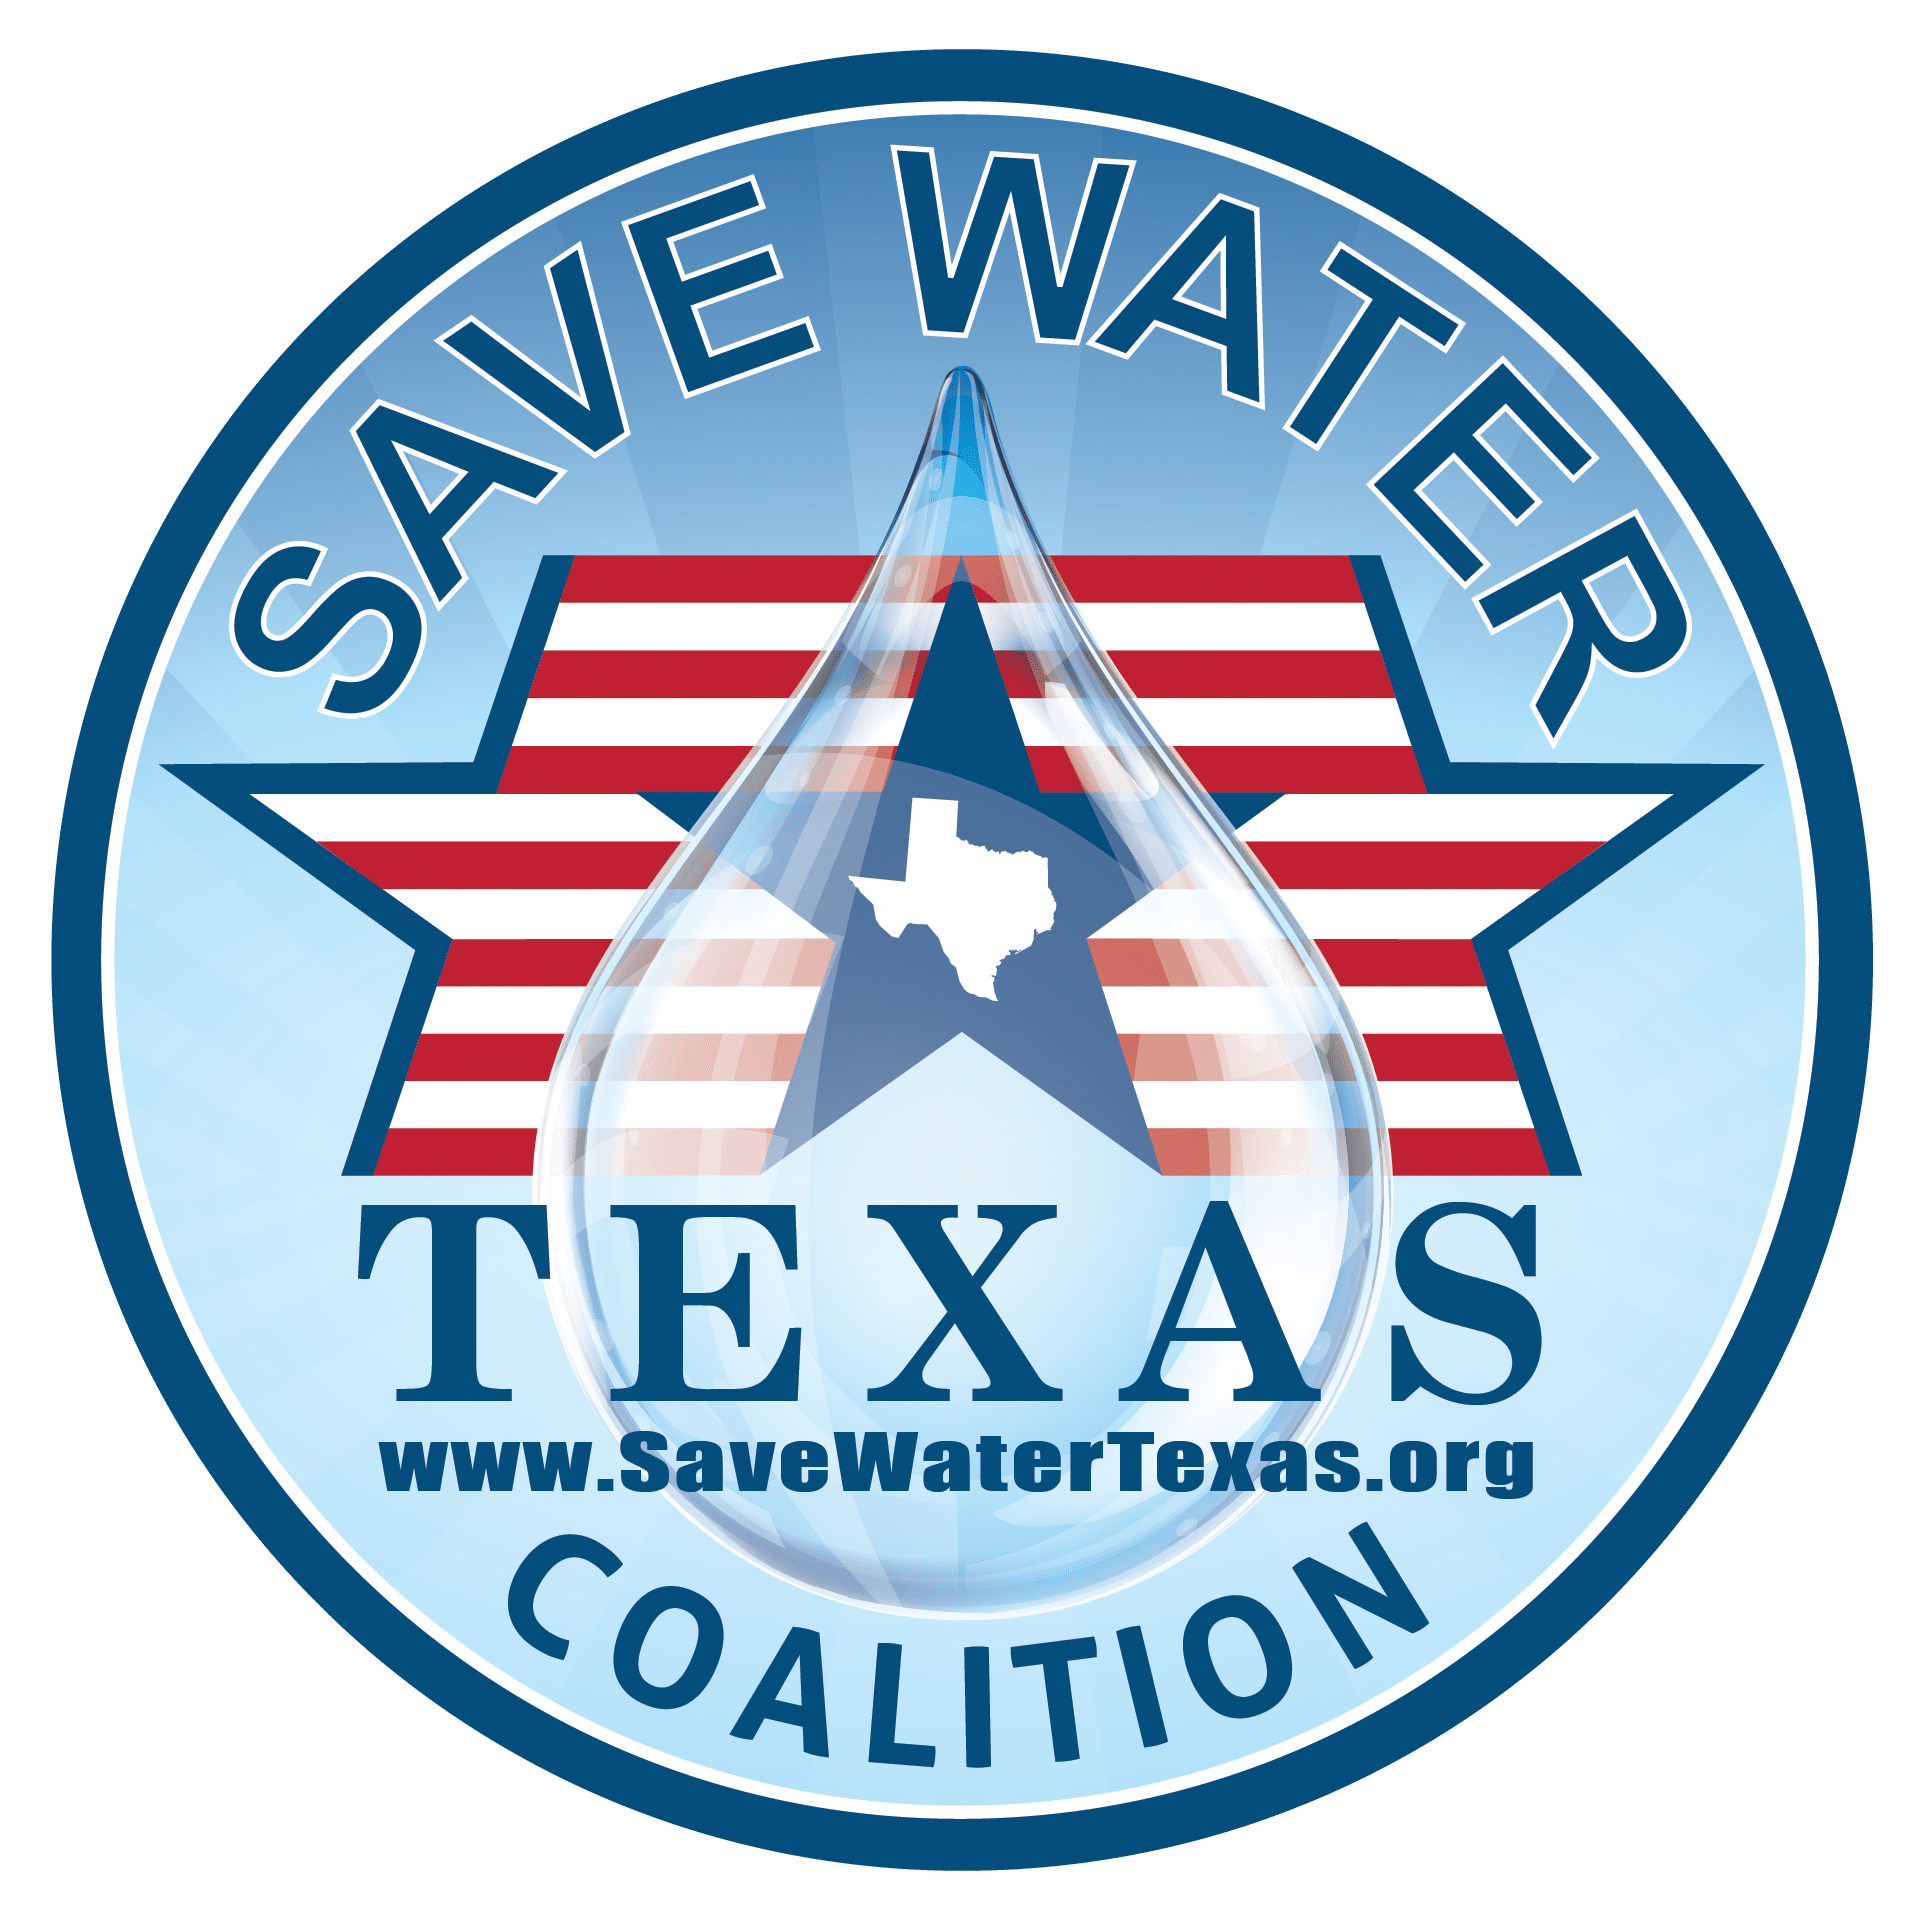 Save Water Texas Coalition